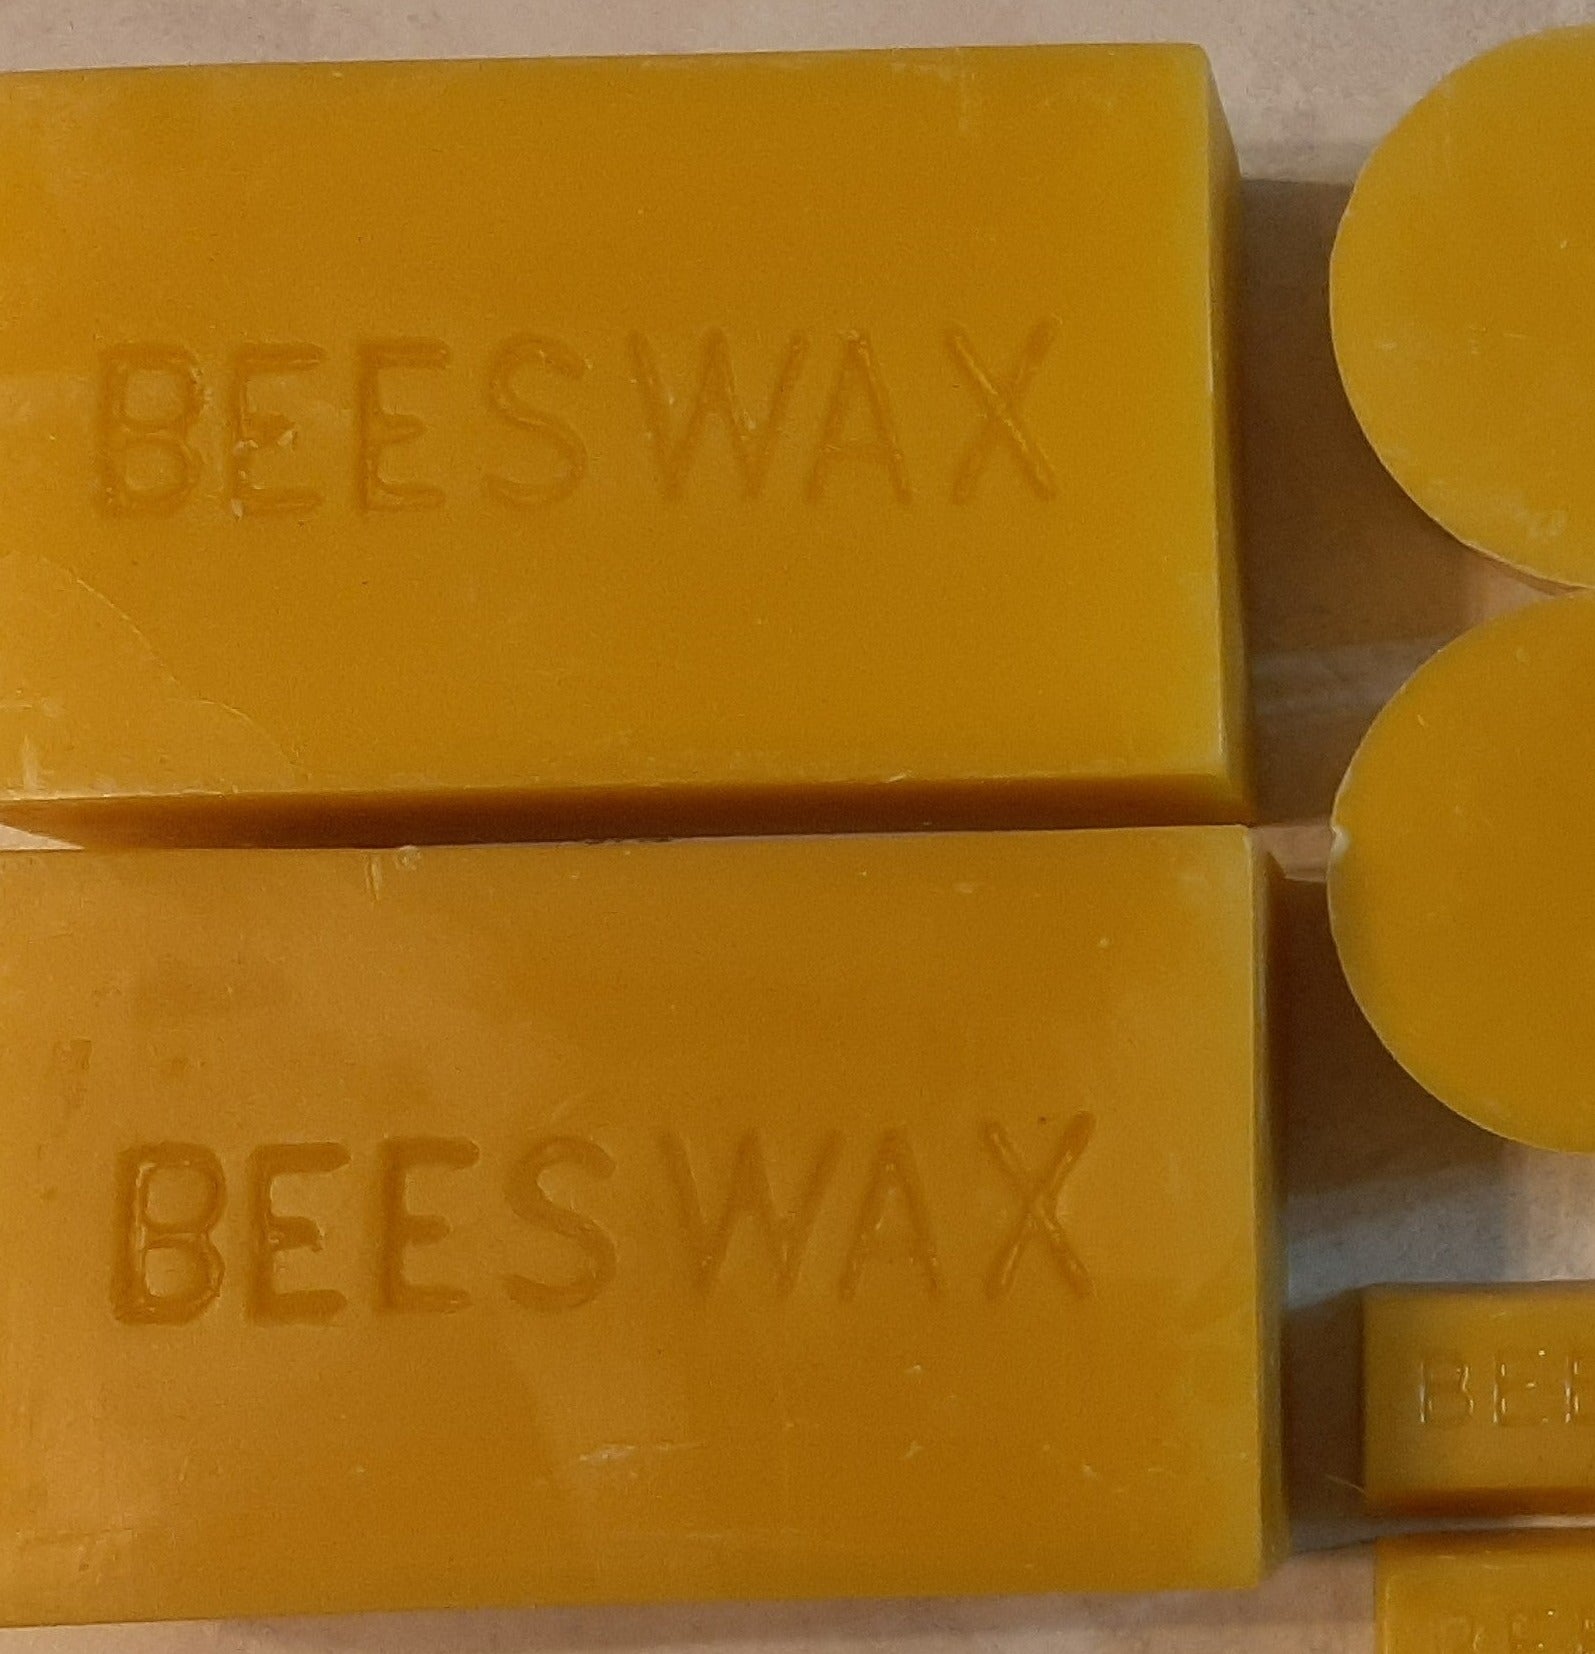 Sukh 12PCS Yellow Beeswax Bar - 300g Beeswax Block - Wax Bar Wax Block  Yellow Beeswax Bulk Bar of Wax Yellow Beeswax for Candles Triple Filtered